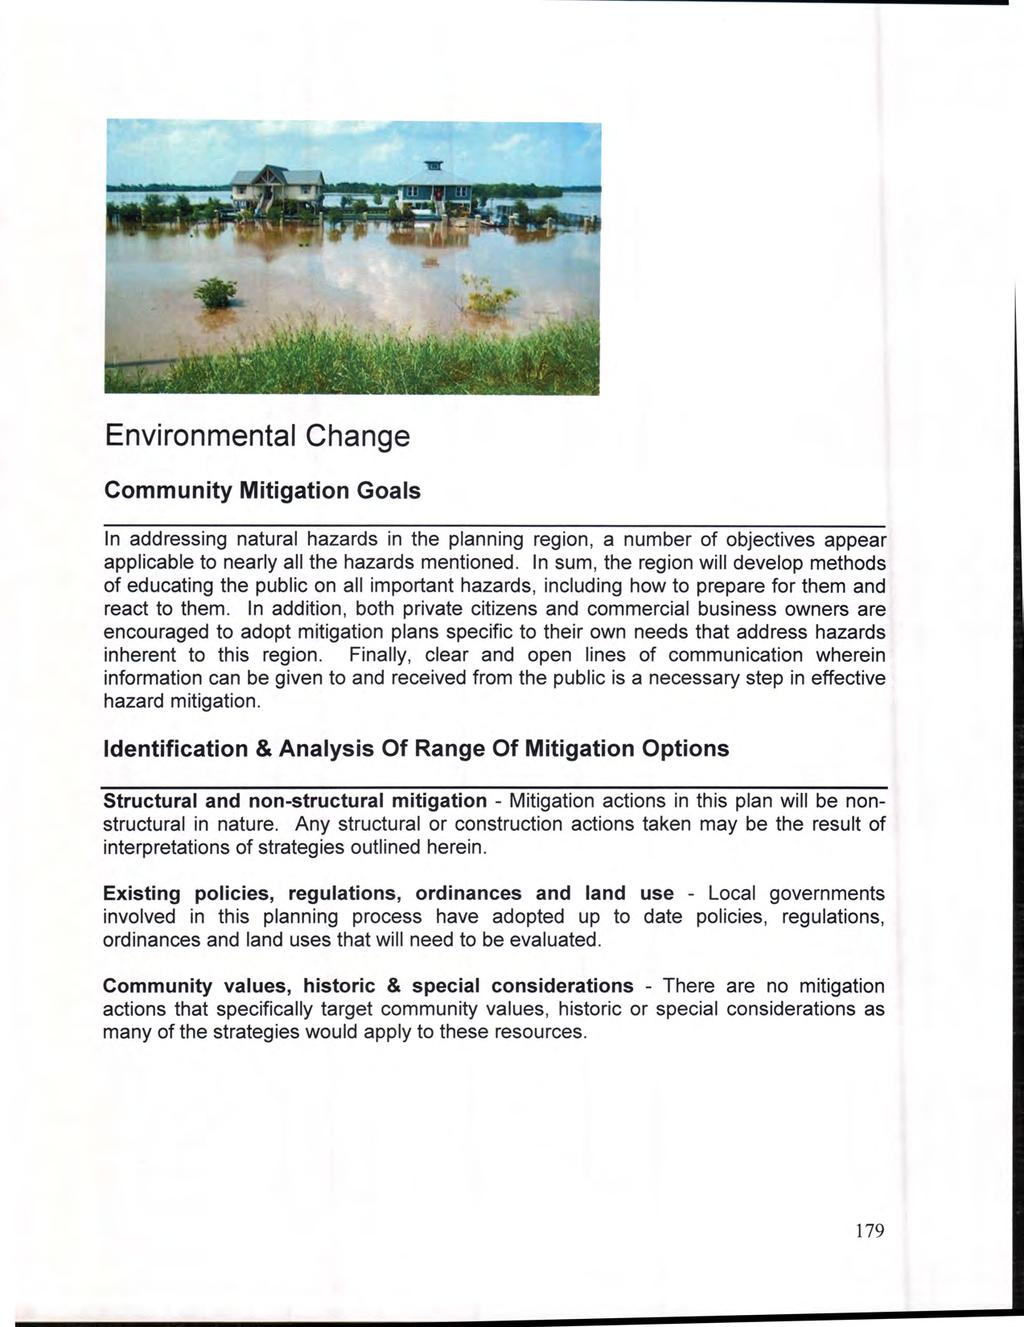 Environmental Change Community Mitigation Goals In addressing natural hazards in the planning region, a number of objectives appear applicable to nearly all the hazards mentioned.